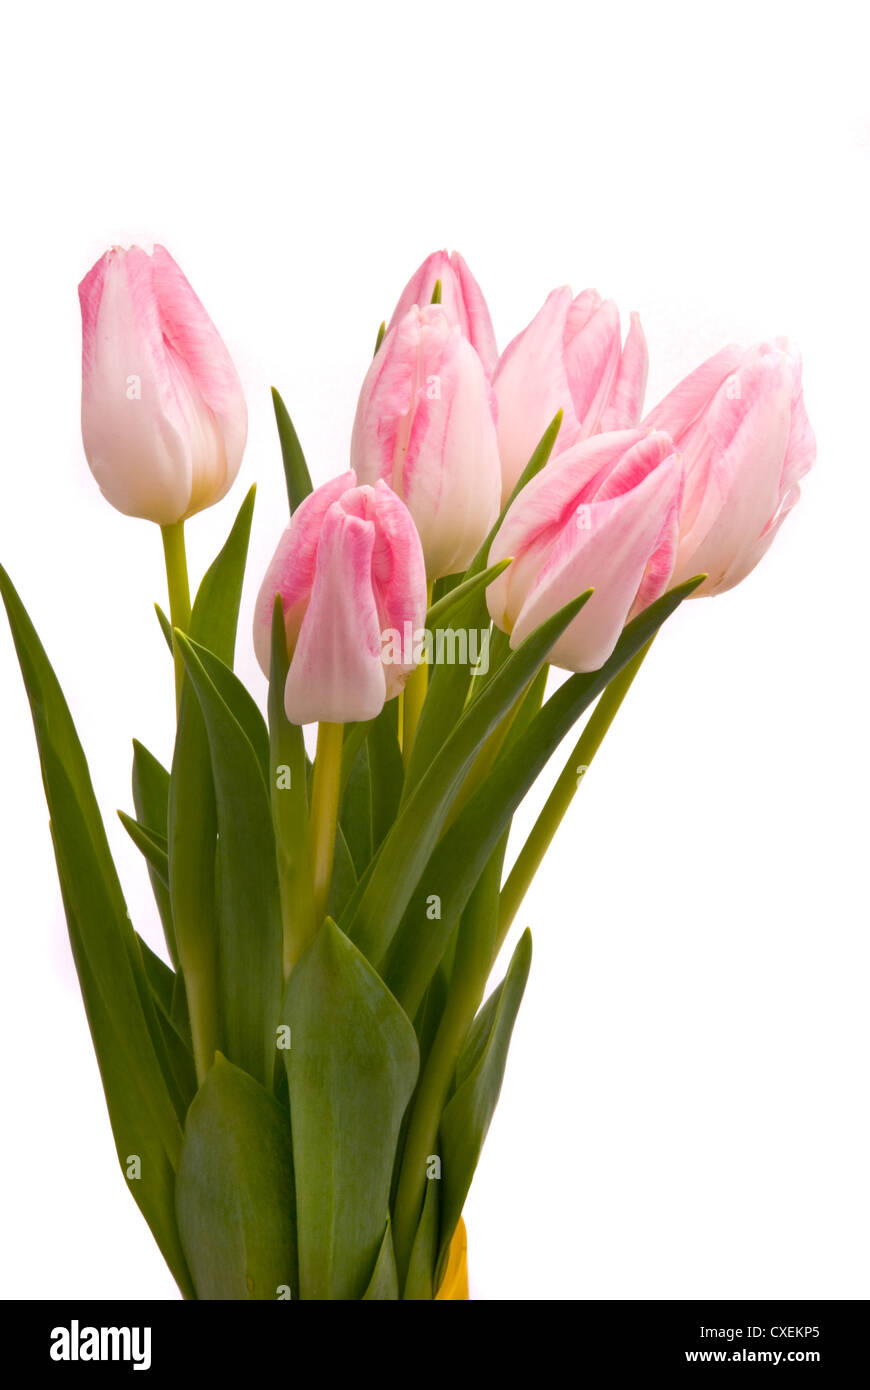 Pink tulips on a white background Stock Photo